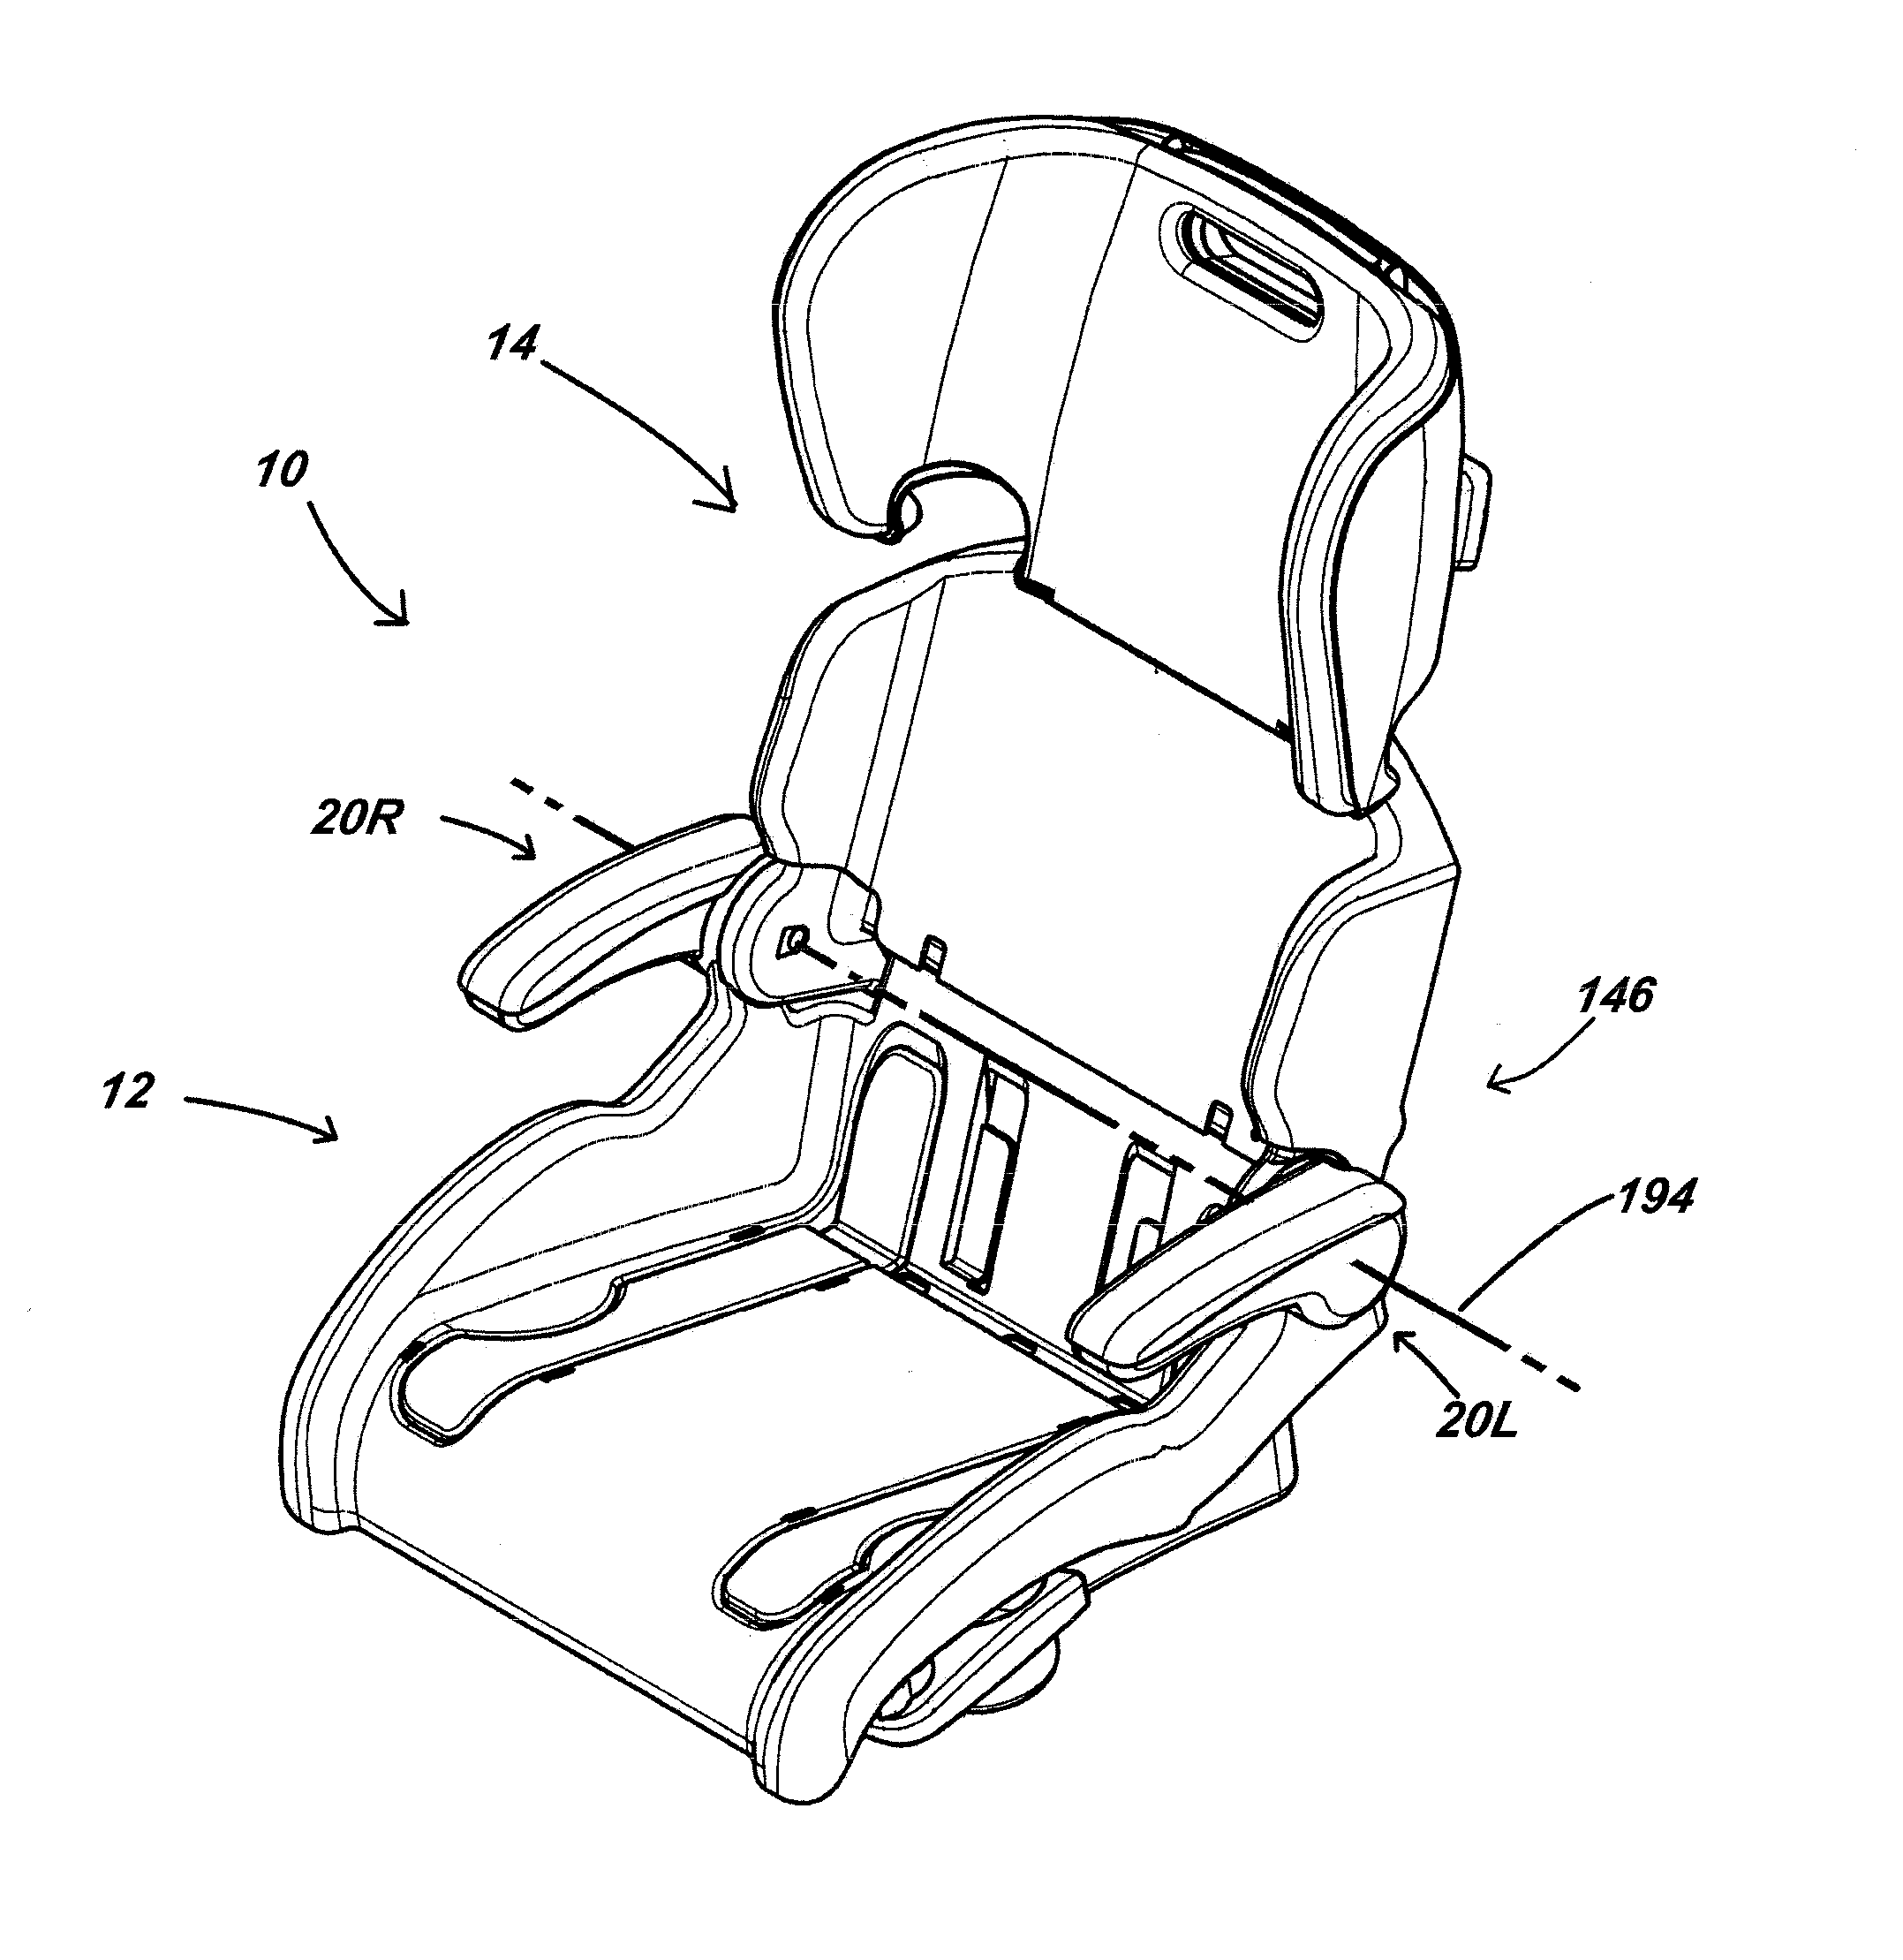 Low Cost Adjustable and Foldable Car Seat